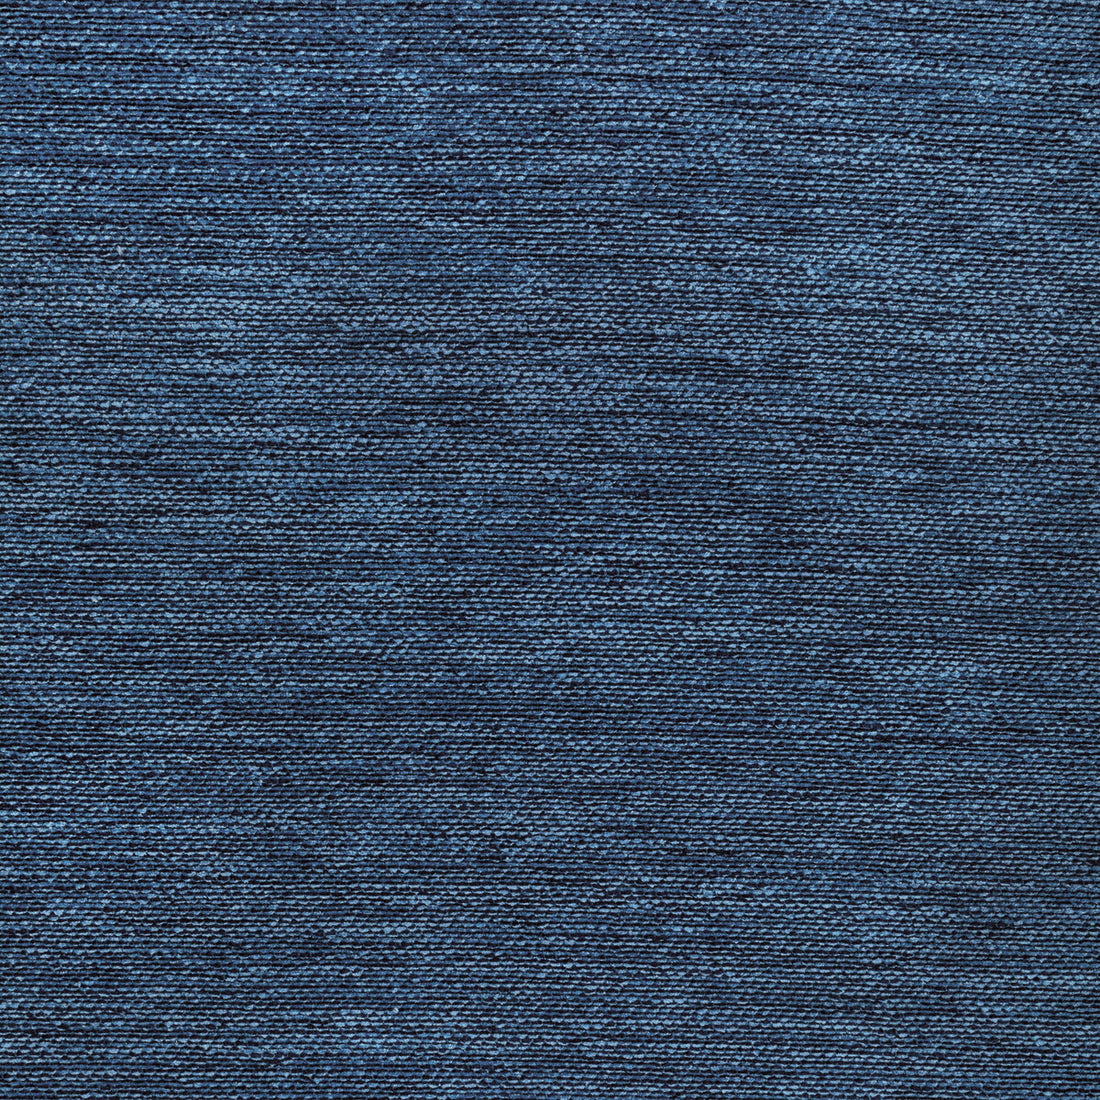 Cognin Texture fabric in blue color - pattern 8022126.5.0 - by Brunschwig &amp; Fils in the Chambery Textures III collection